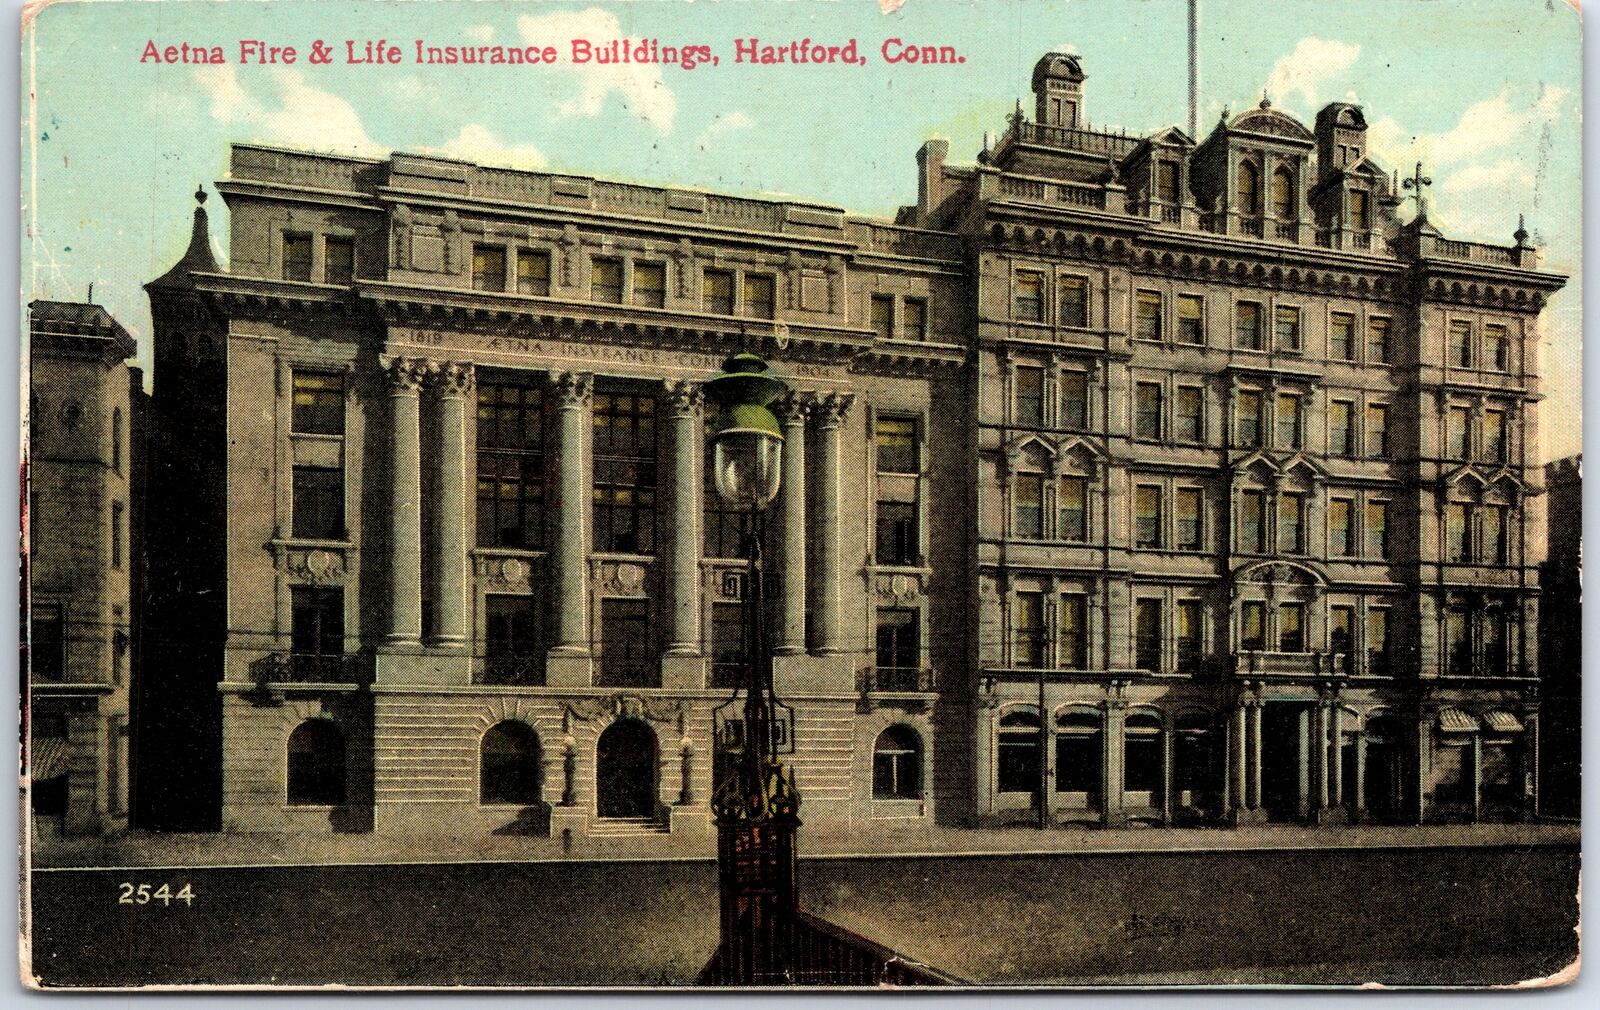 VINTAGE POSTCARD THE AETNA FIRE & LIFE INSURANCE BUILDINGS HARTFORD CONNECTICUT